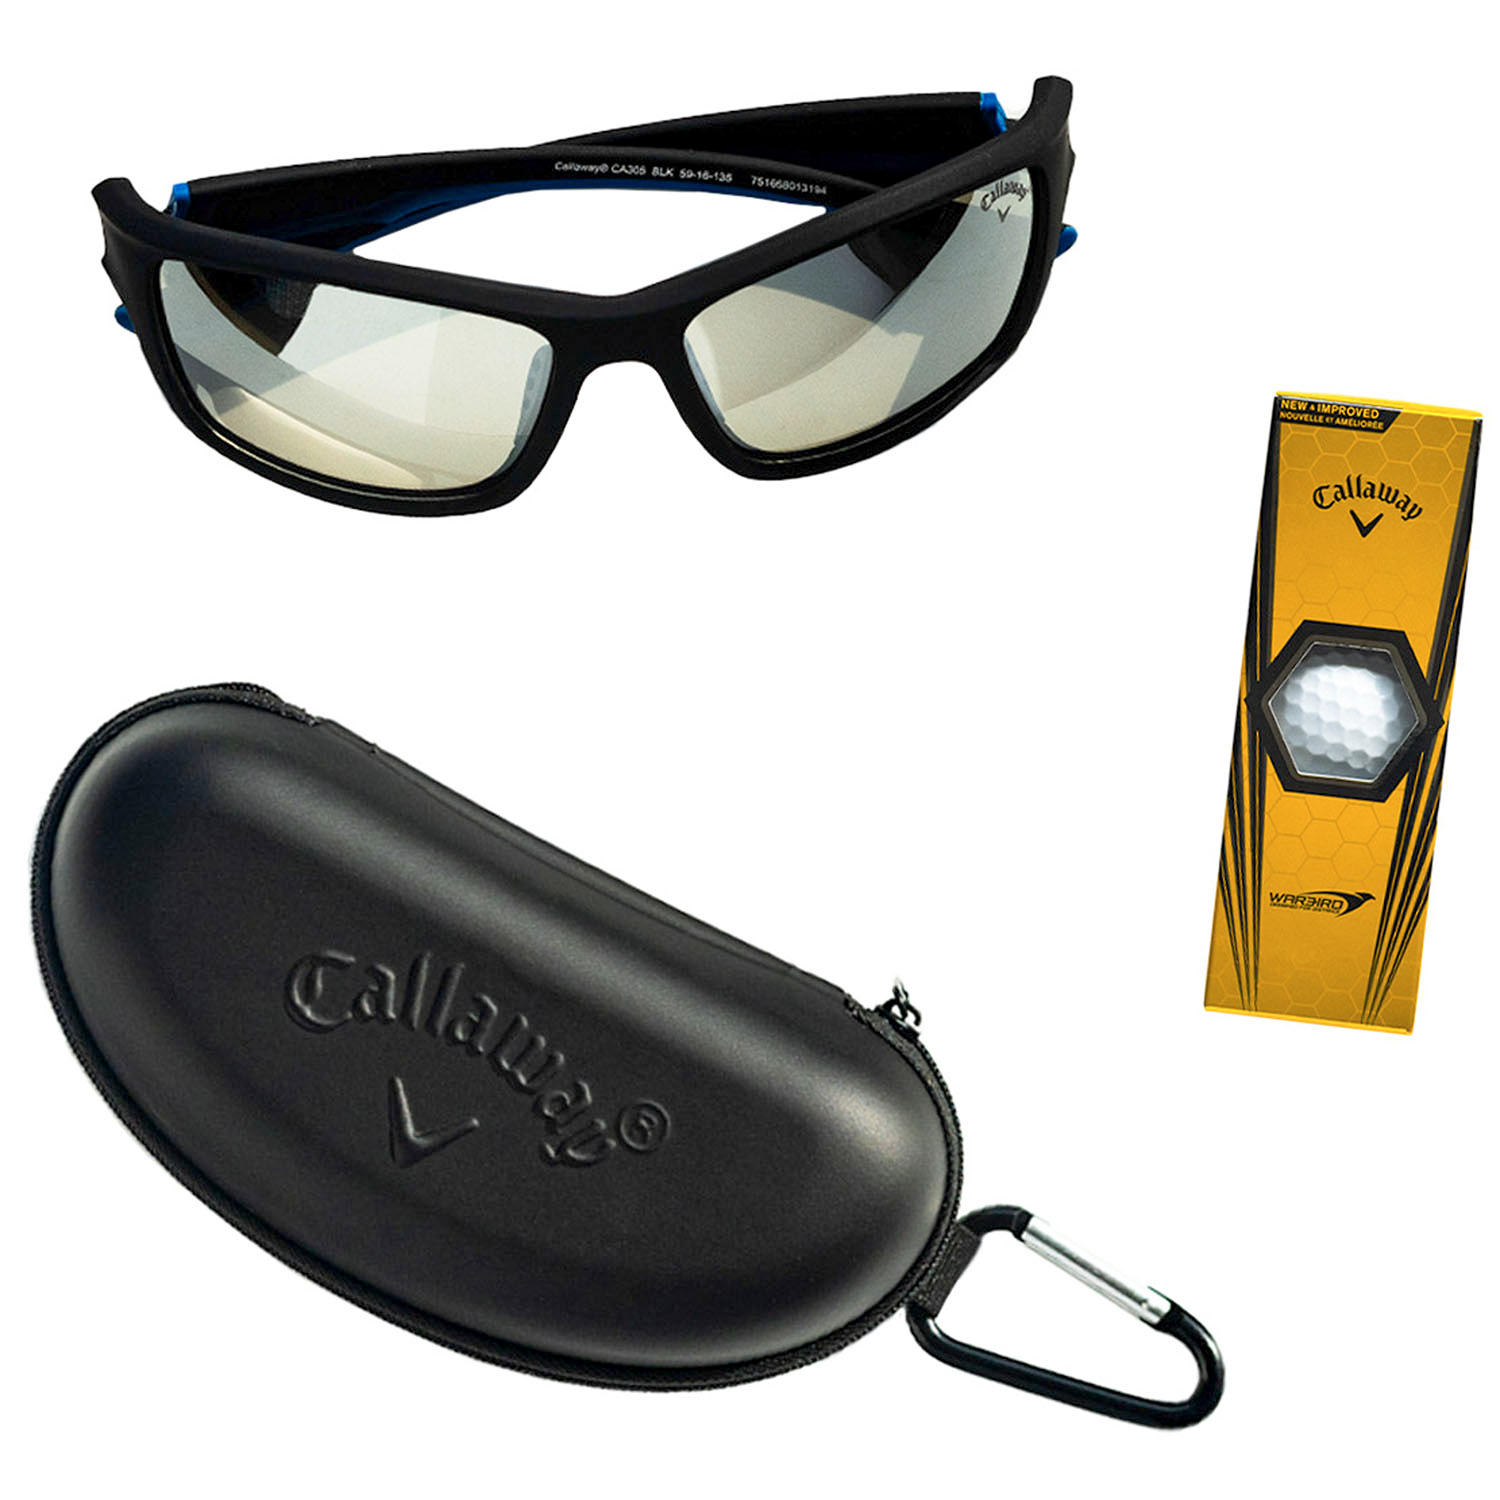 Callaway CA305 Black Plastic Sunglasses with Case and Golf Ball Set